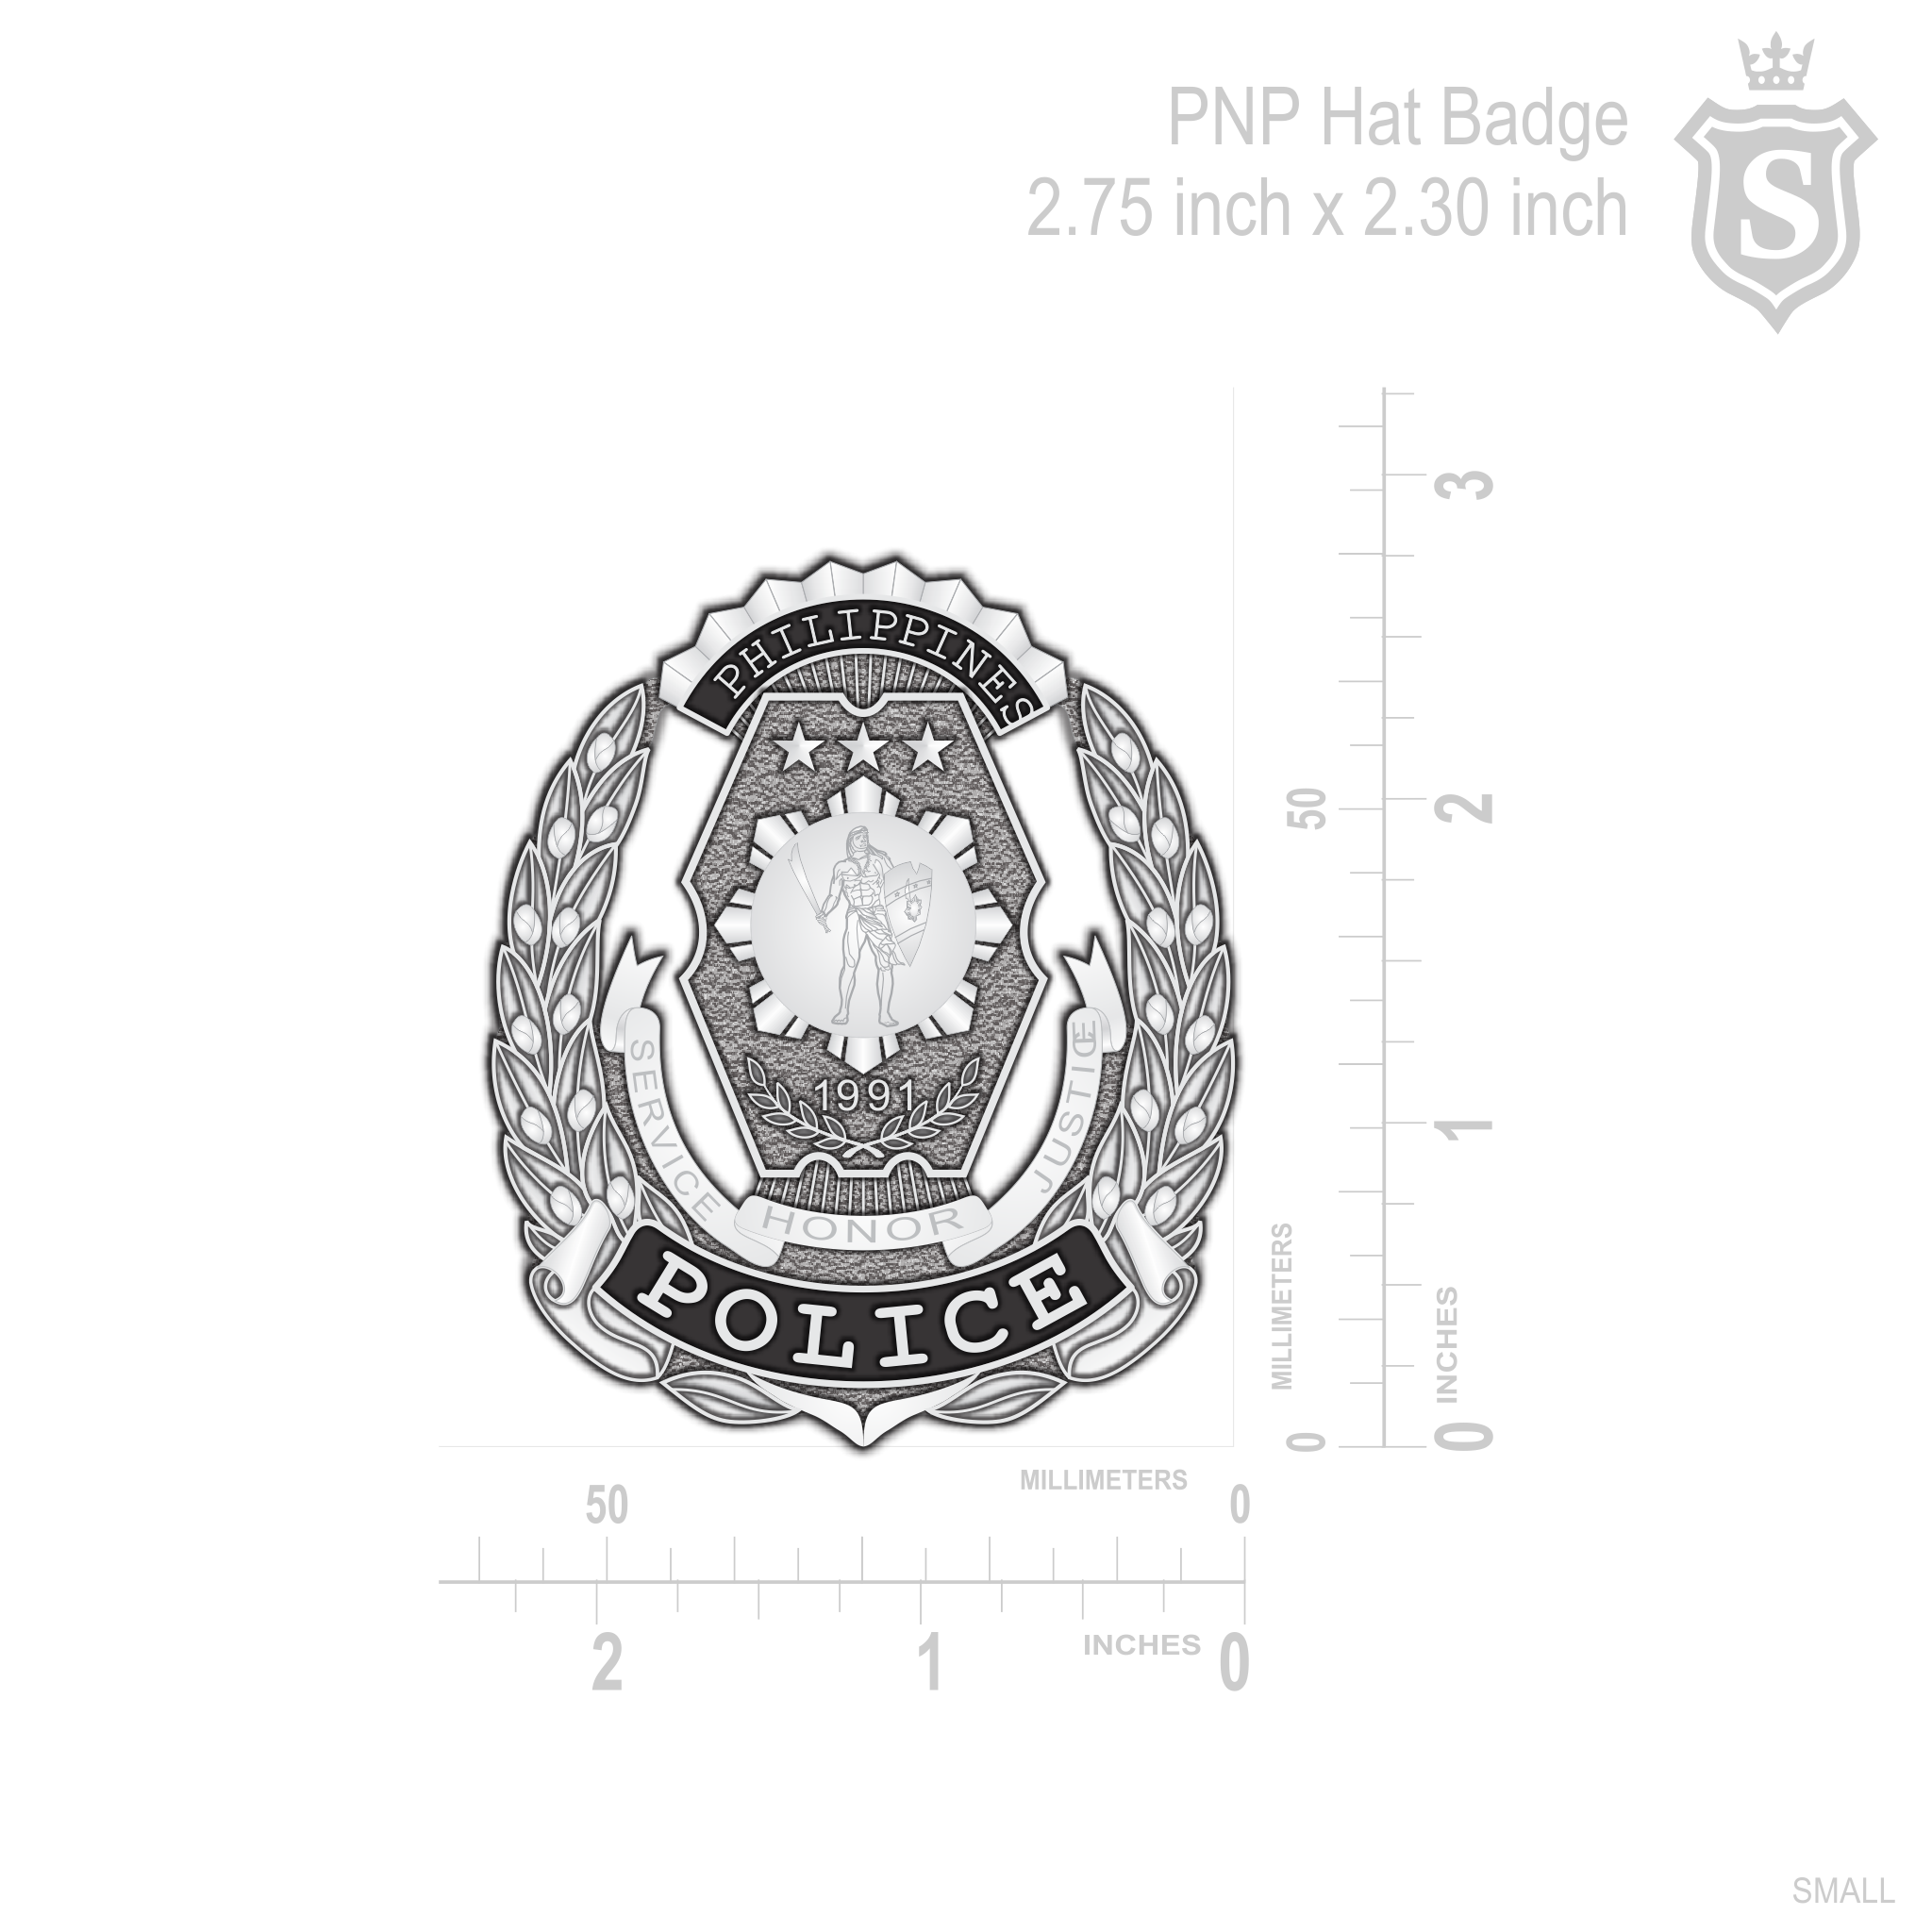 Philippine National Police Hat Badge Cap Device Gold - PNP